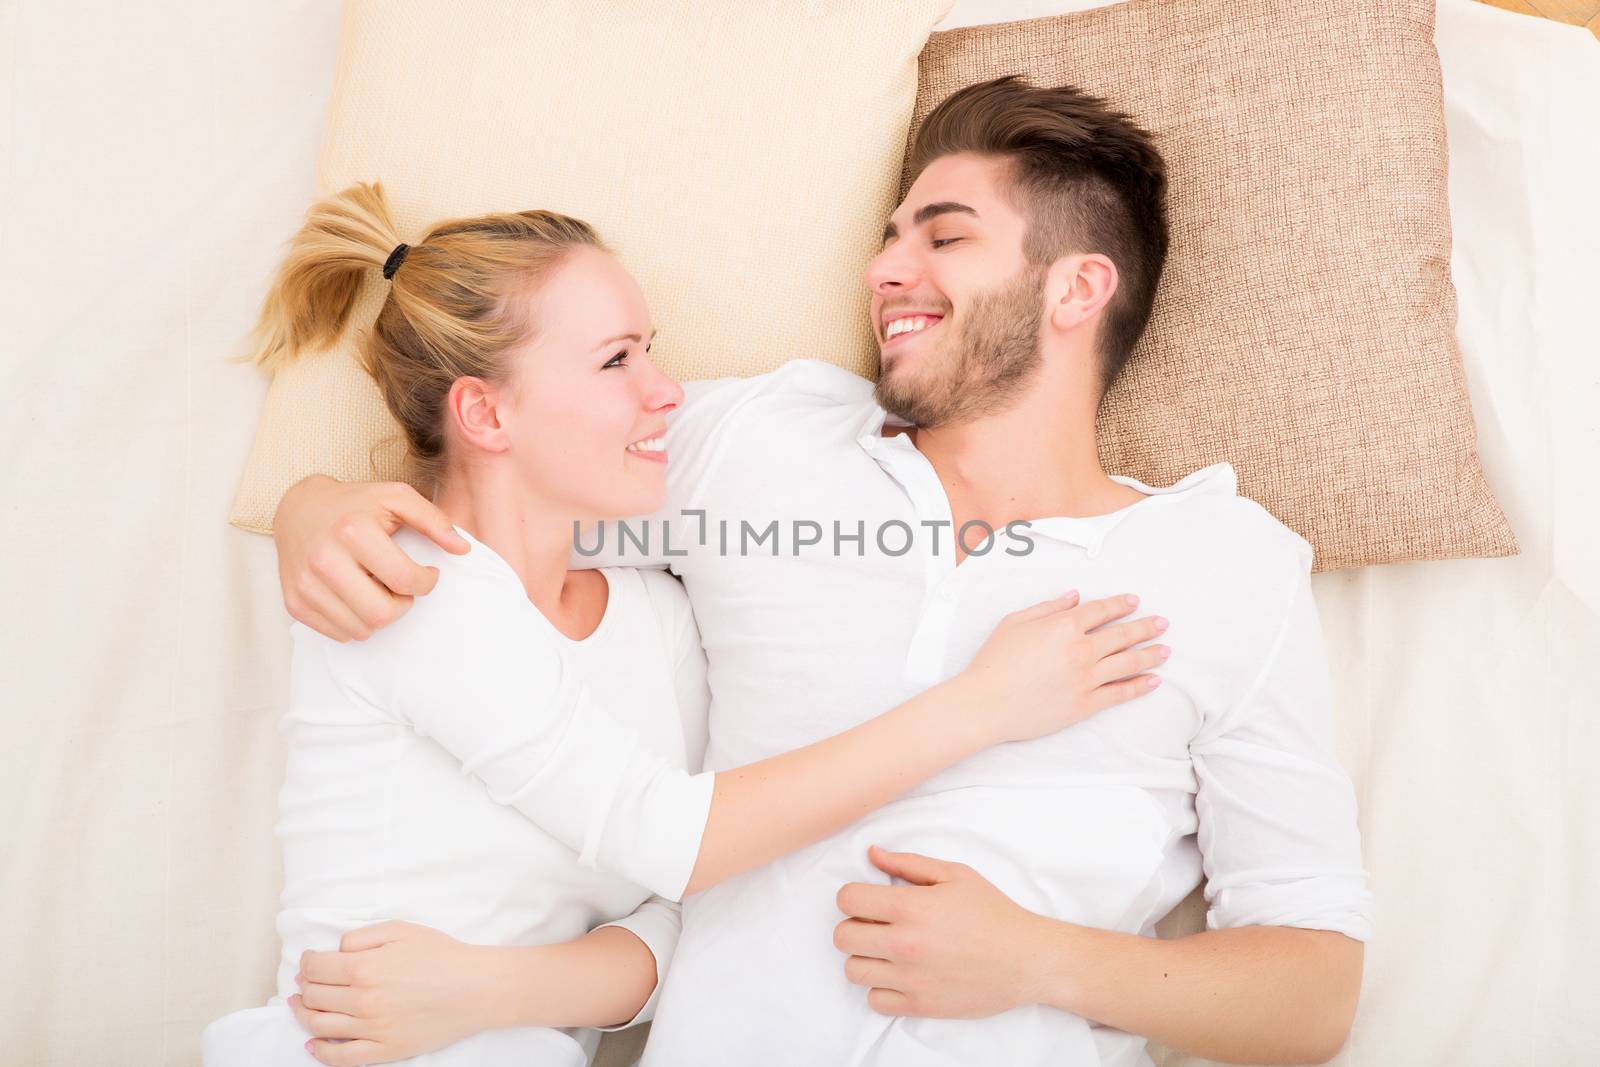 A happy young couple hugging in bed.
